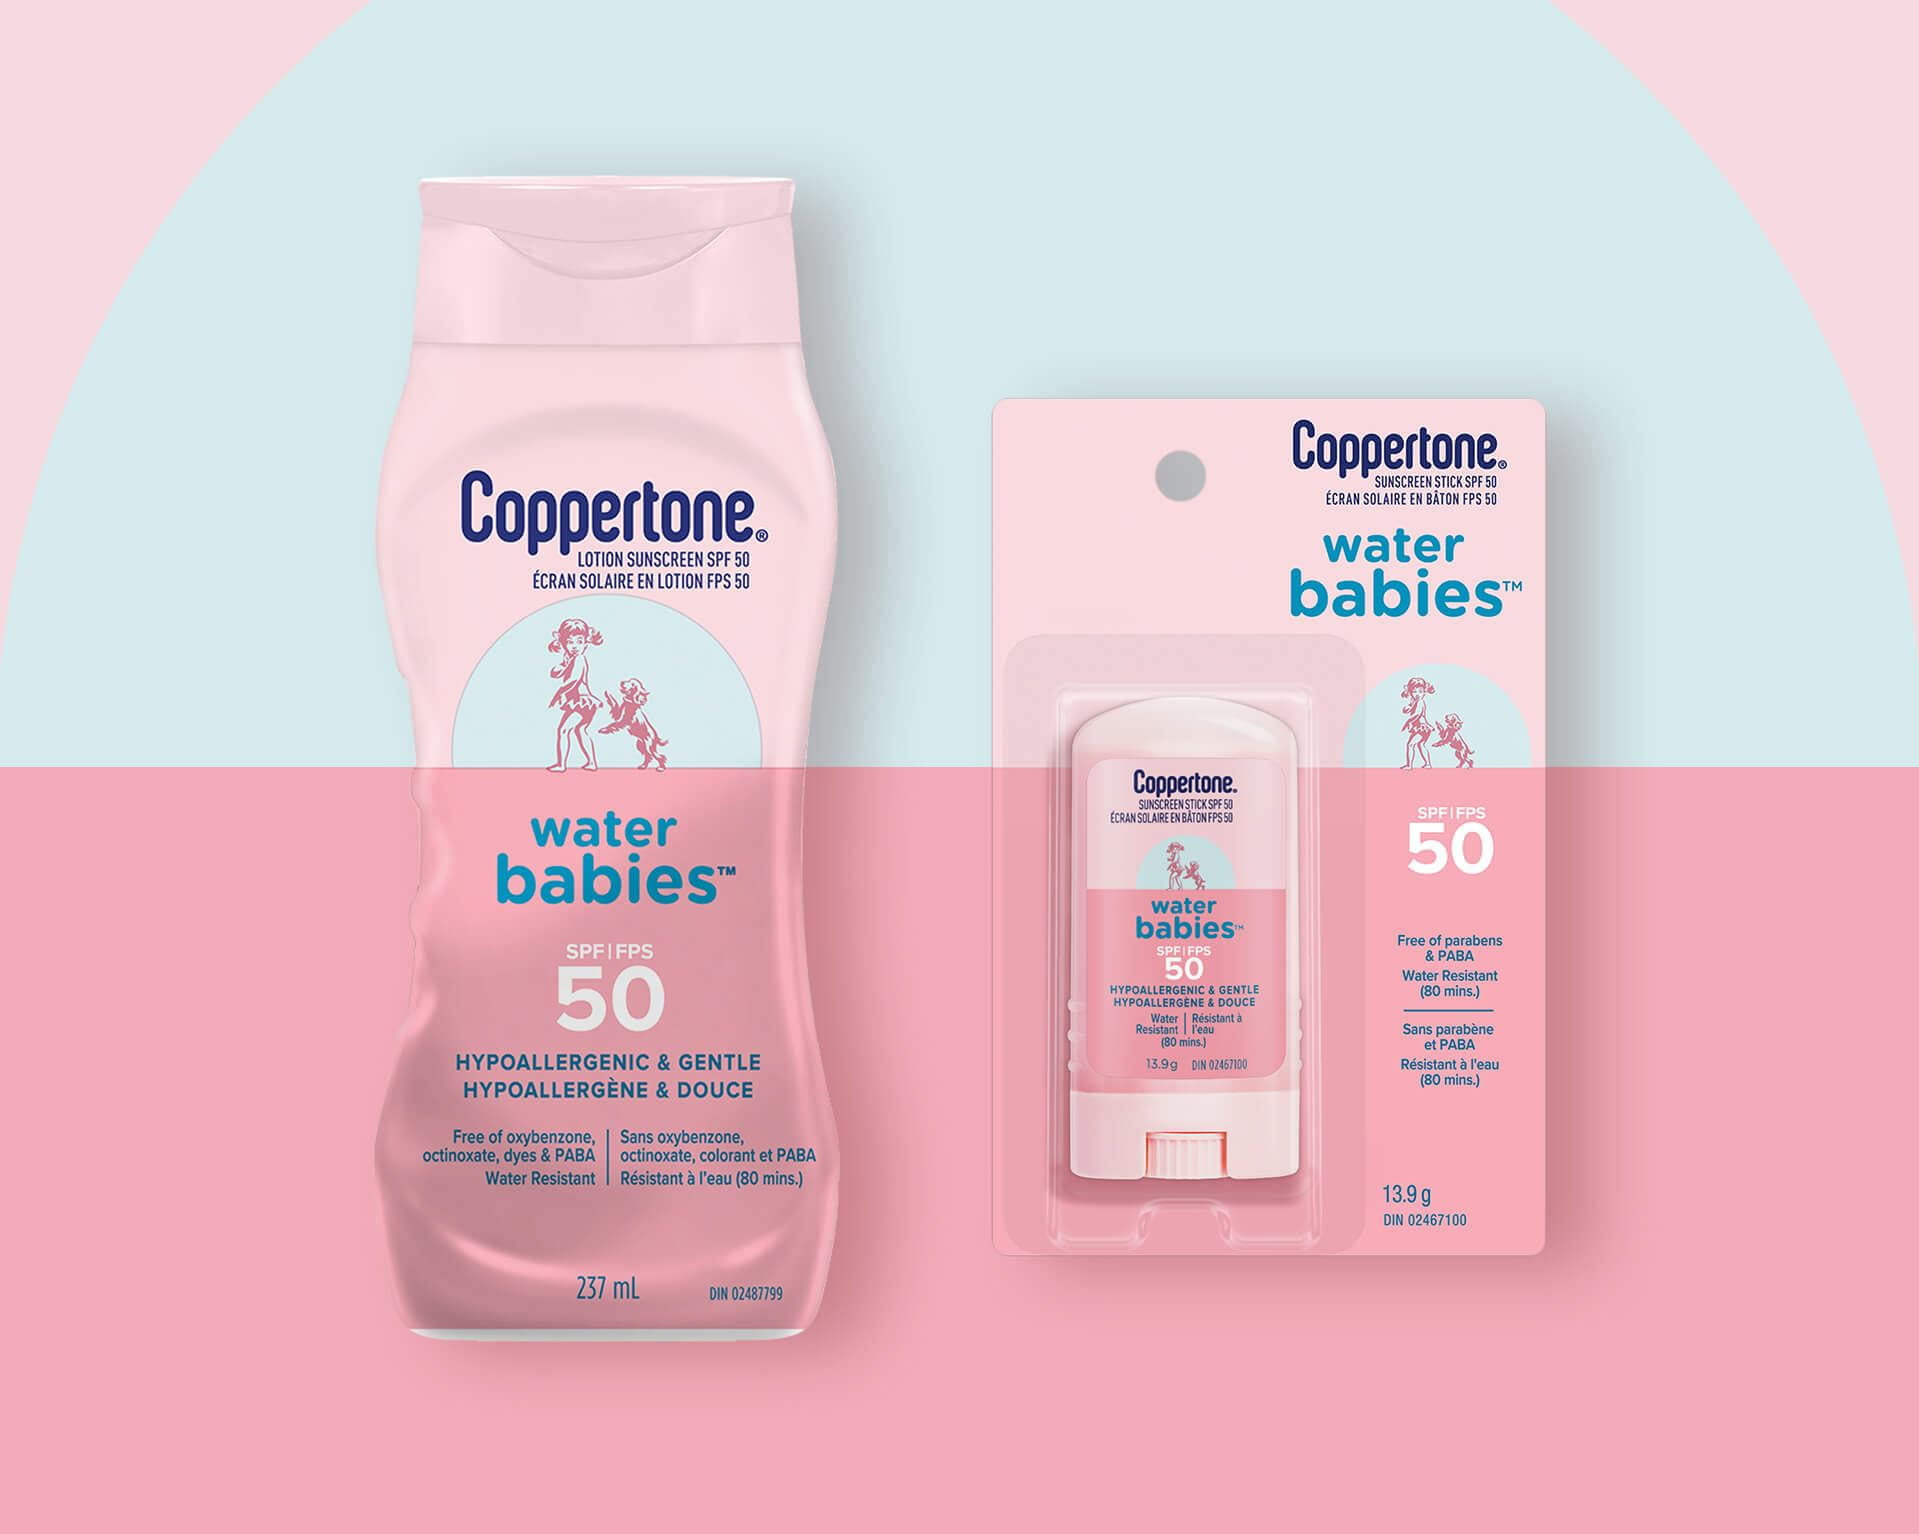 A view of two Coppertone Waterbabies SPF 50 products beside each other with a pink and light blue background shown behind.